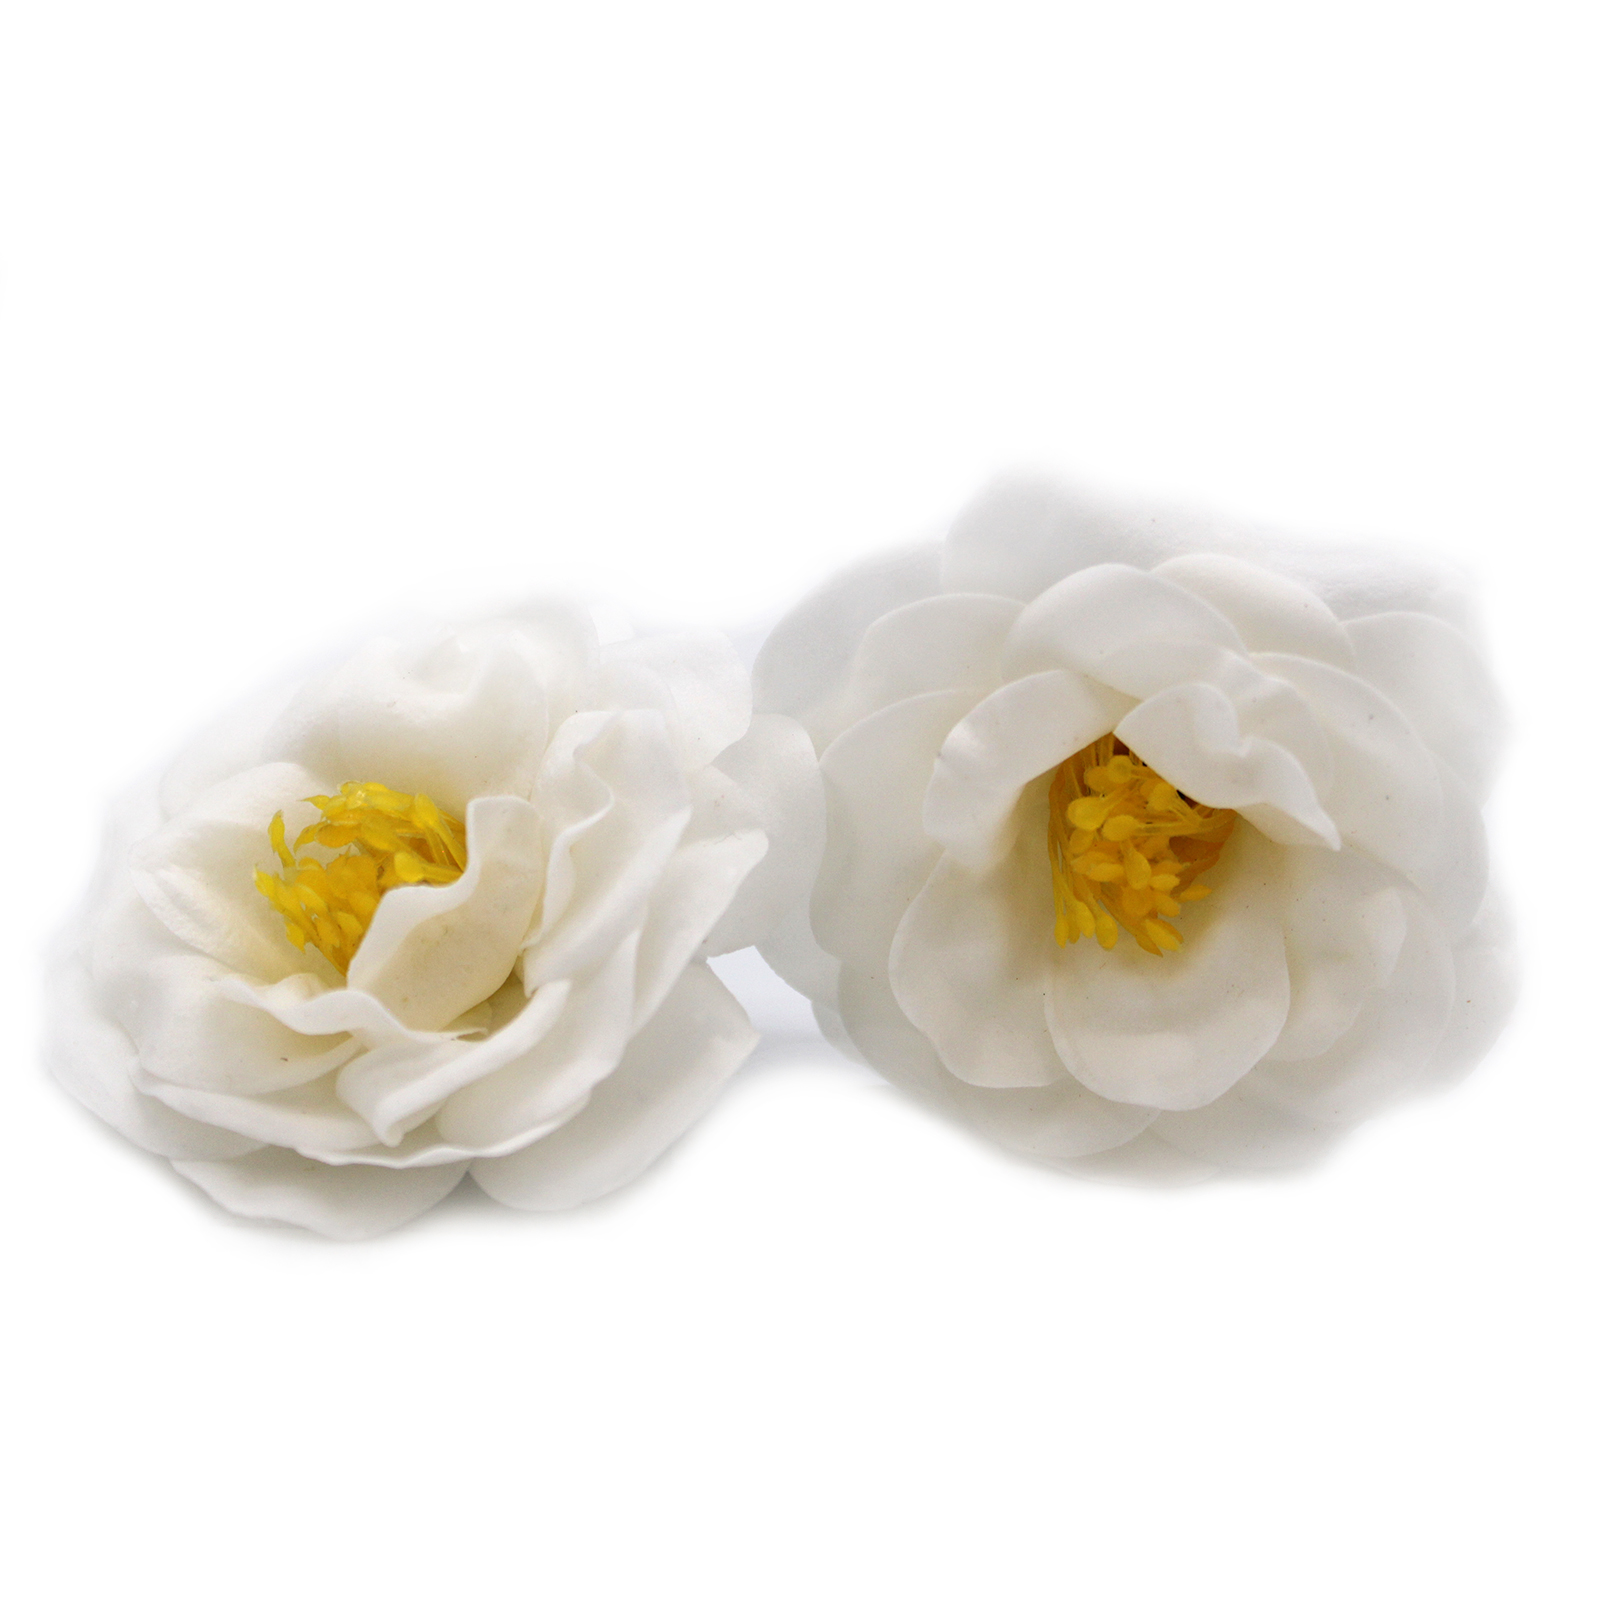 10 x Craft Soap Flowers - Camellia - White